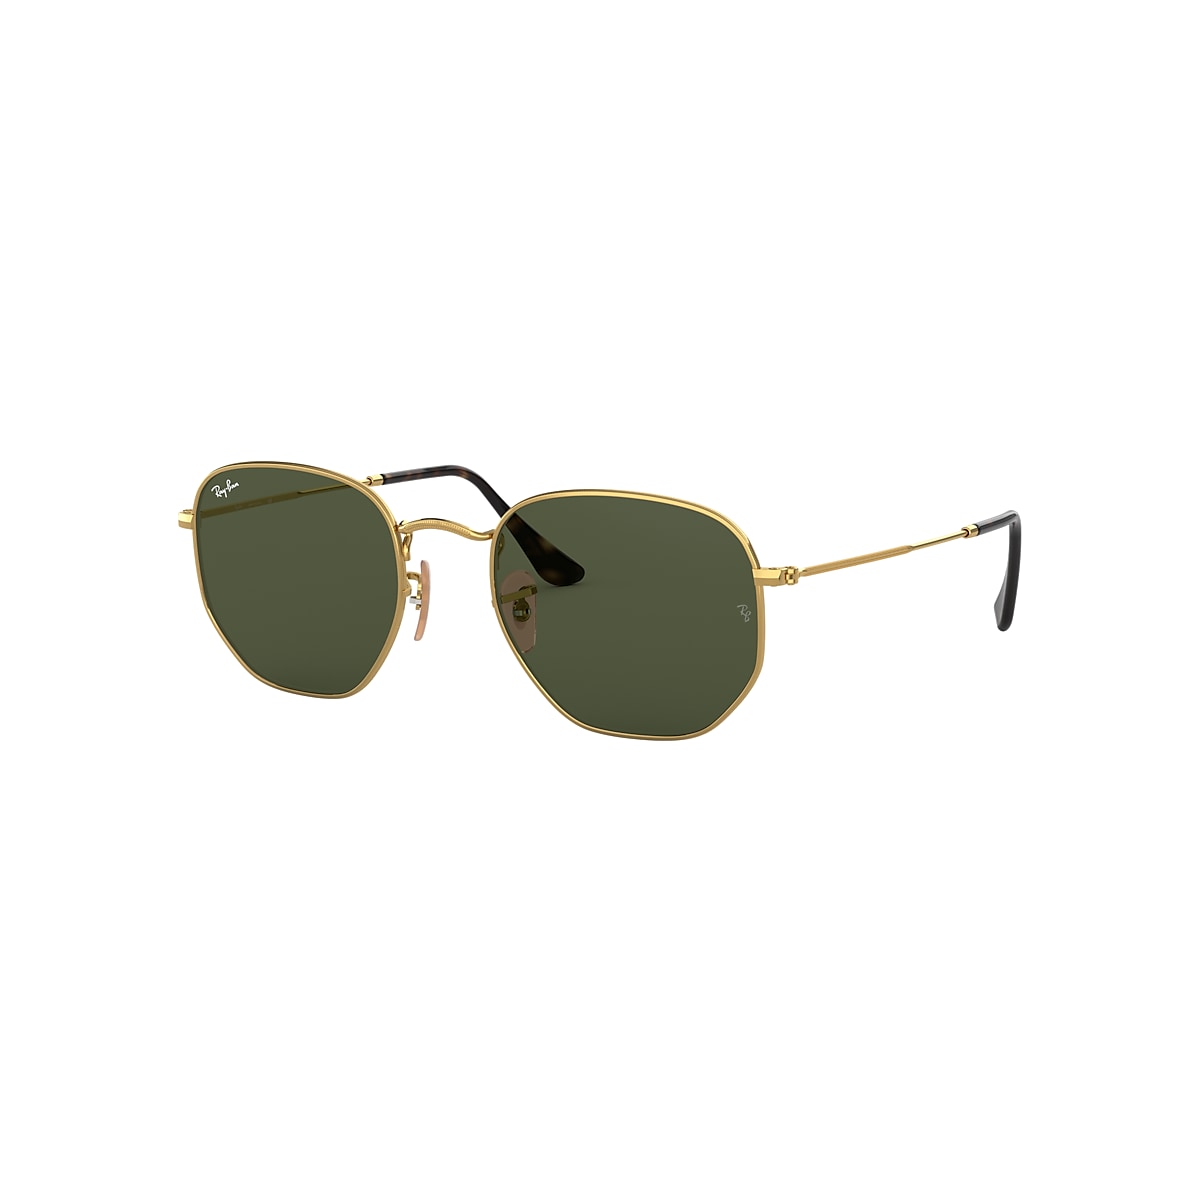 HEXAGONAL FLAT LENSES Sunglasses in Gold and Green - RB3548N